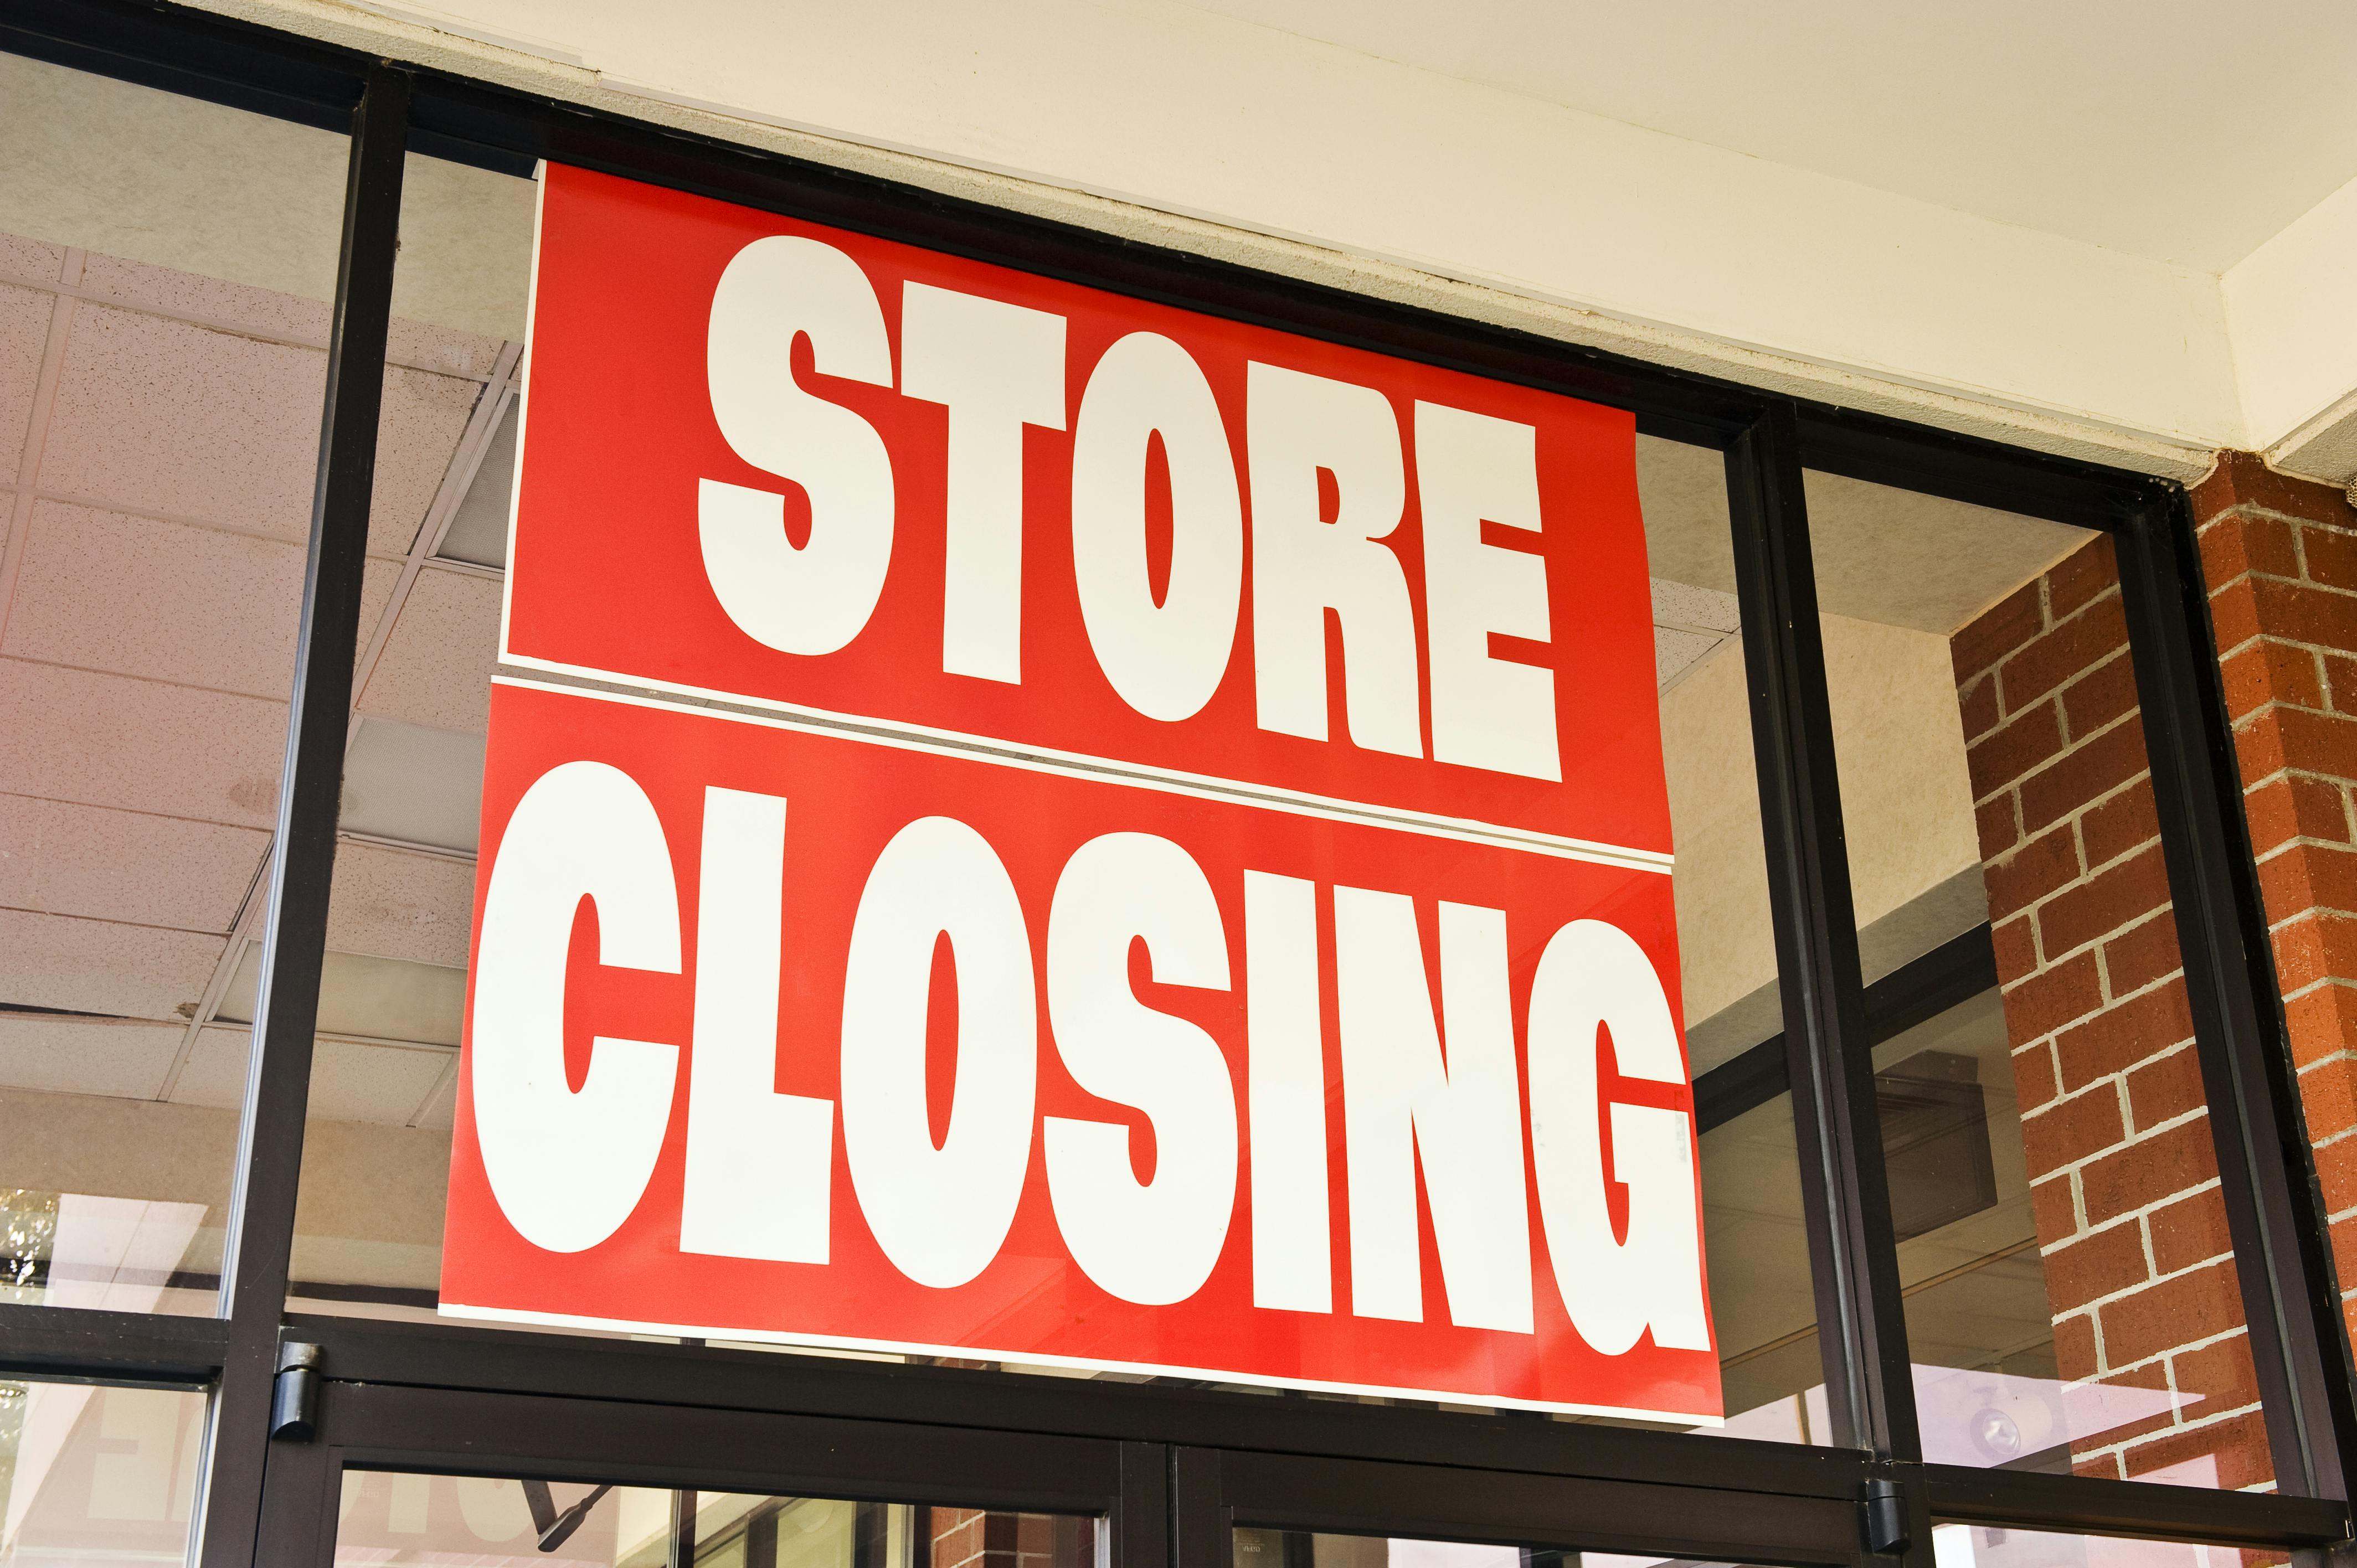 A store closing sign on a window